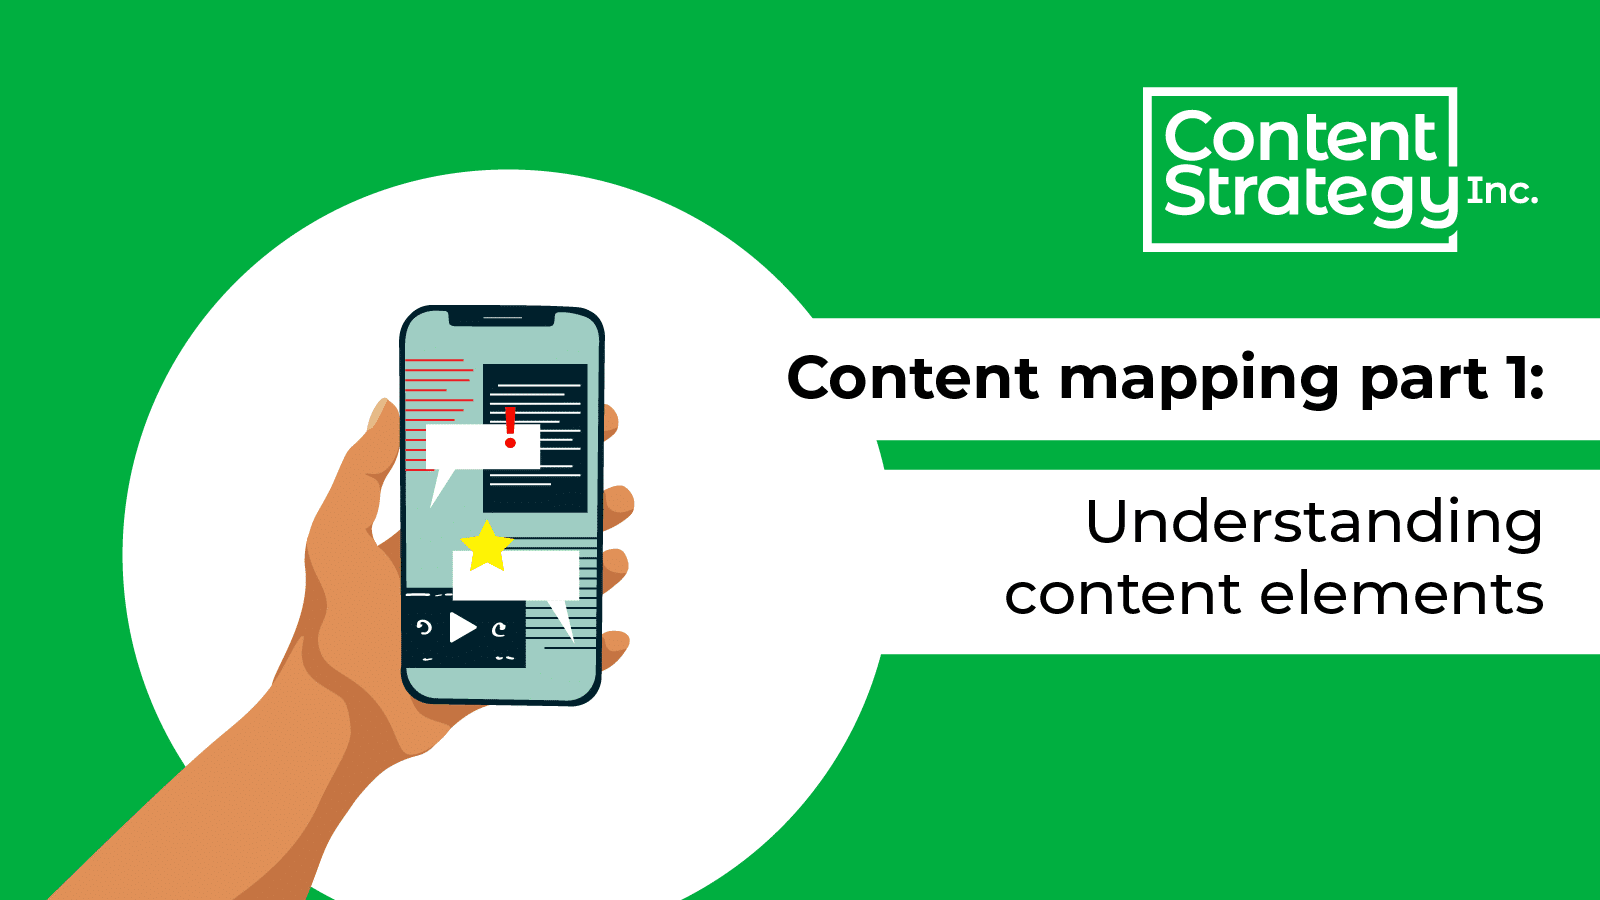 Content mapping part 1: Understanding content elements